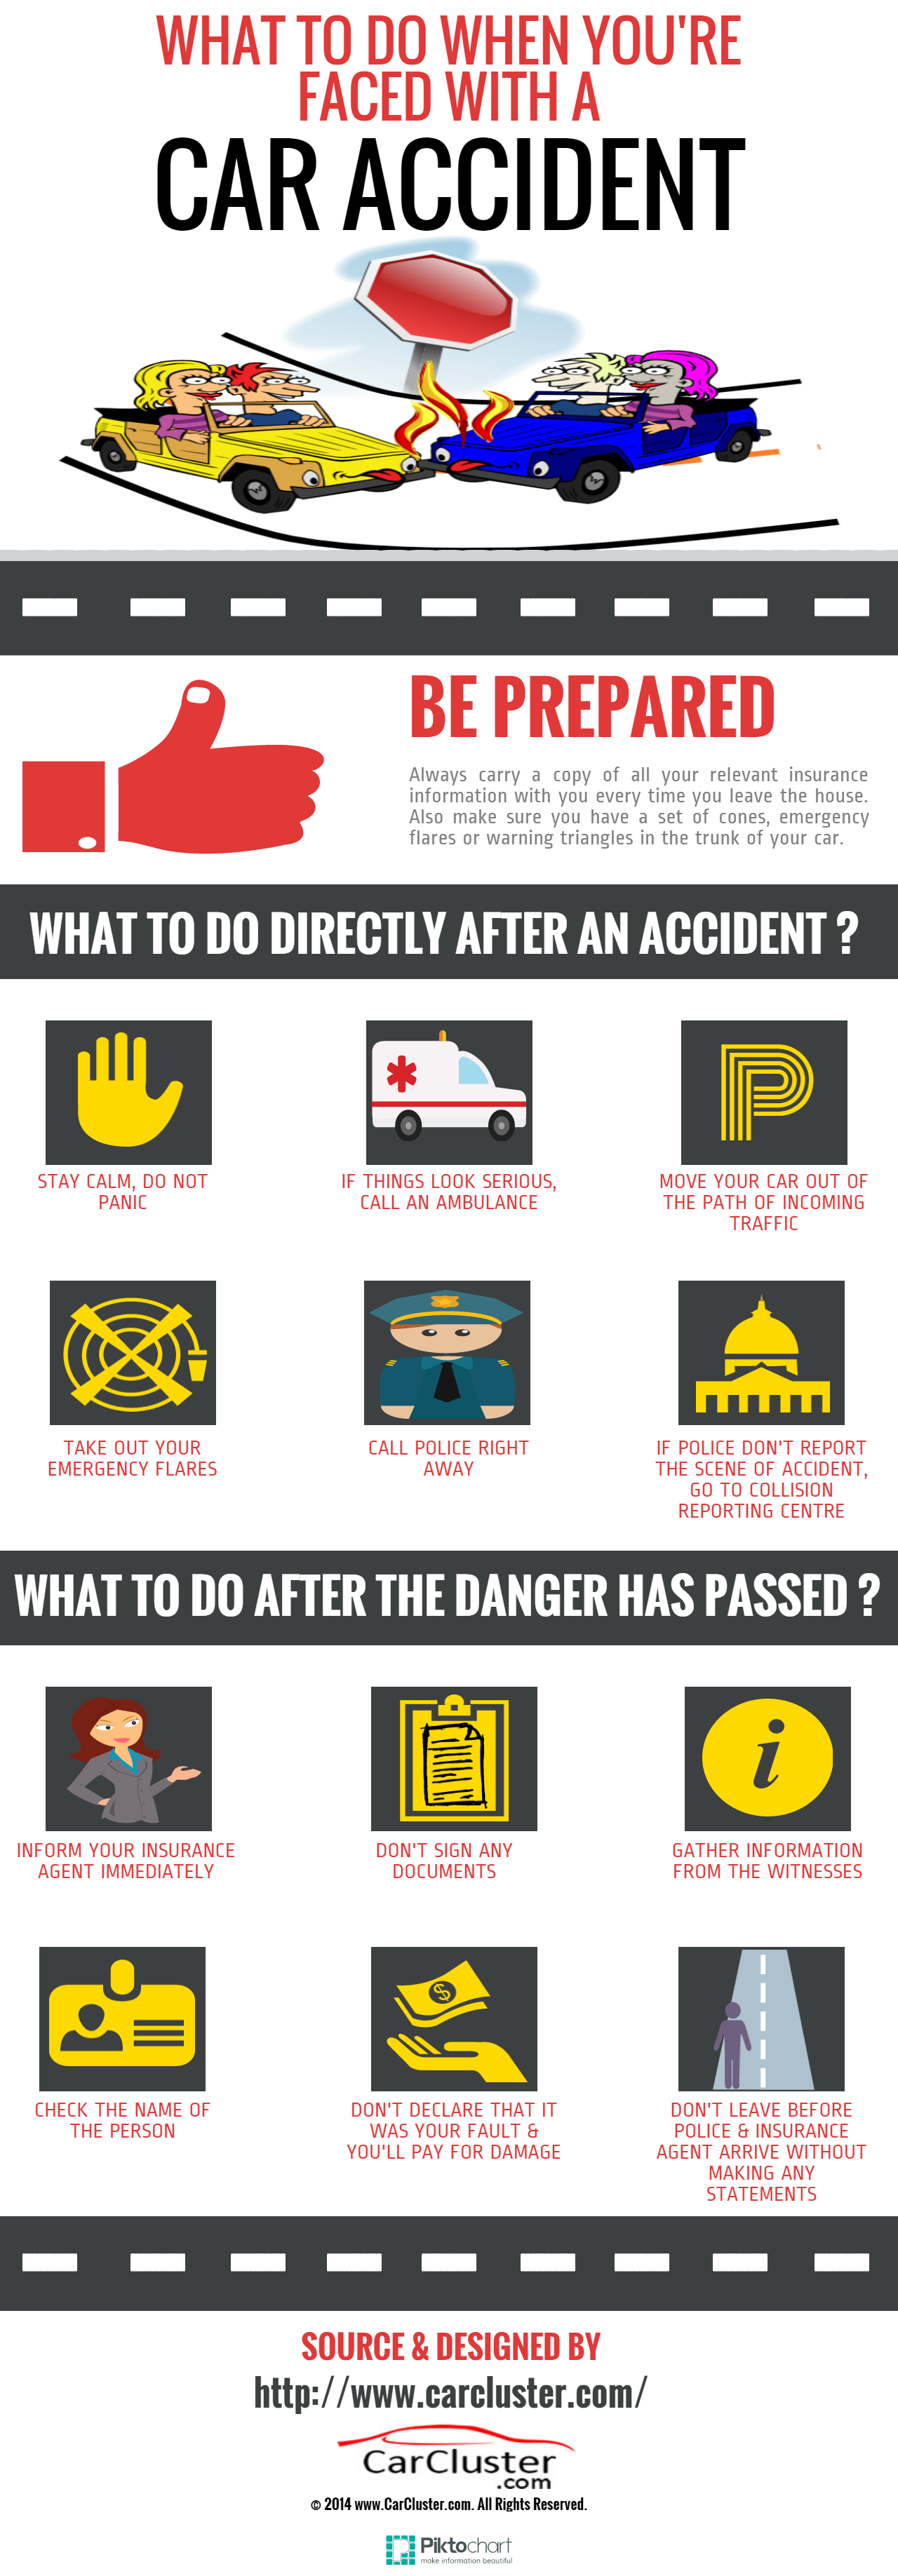 Things to do when faced car accident